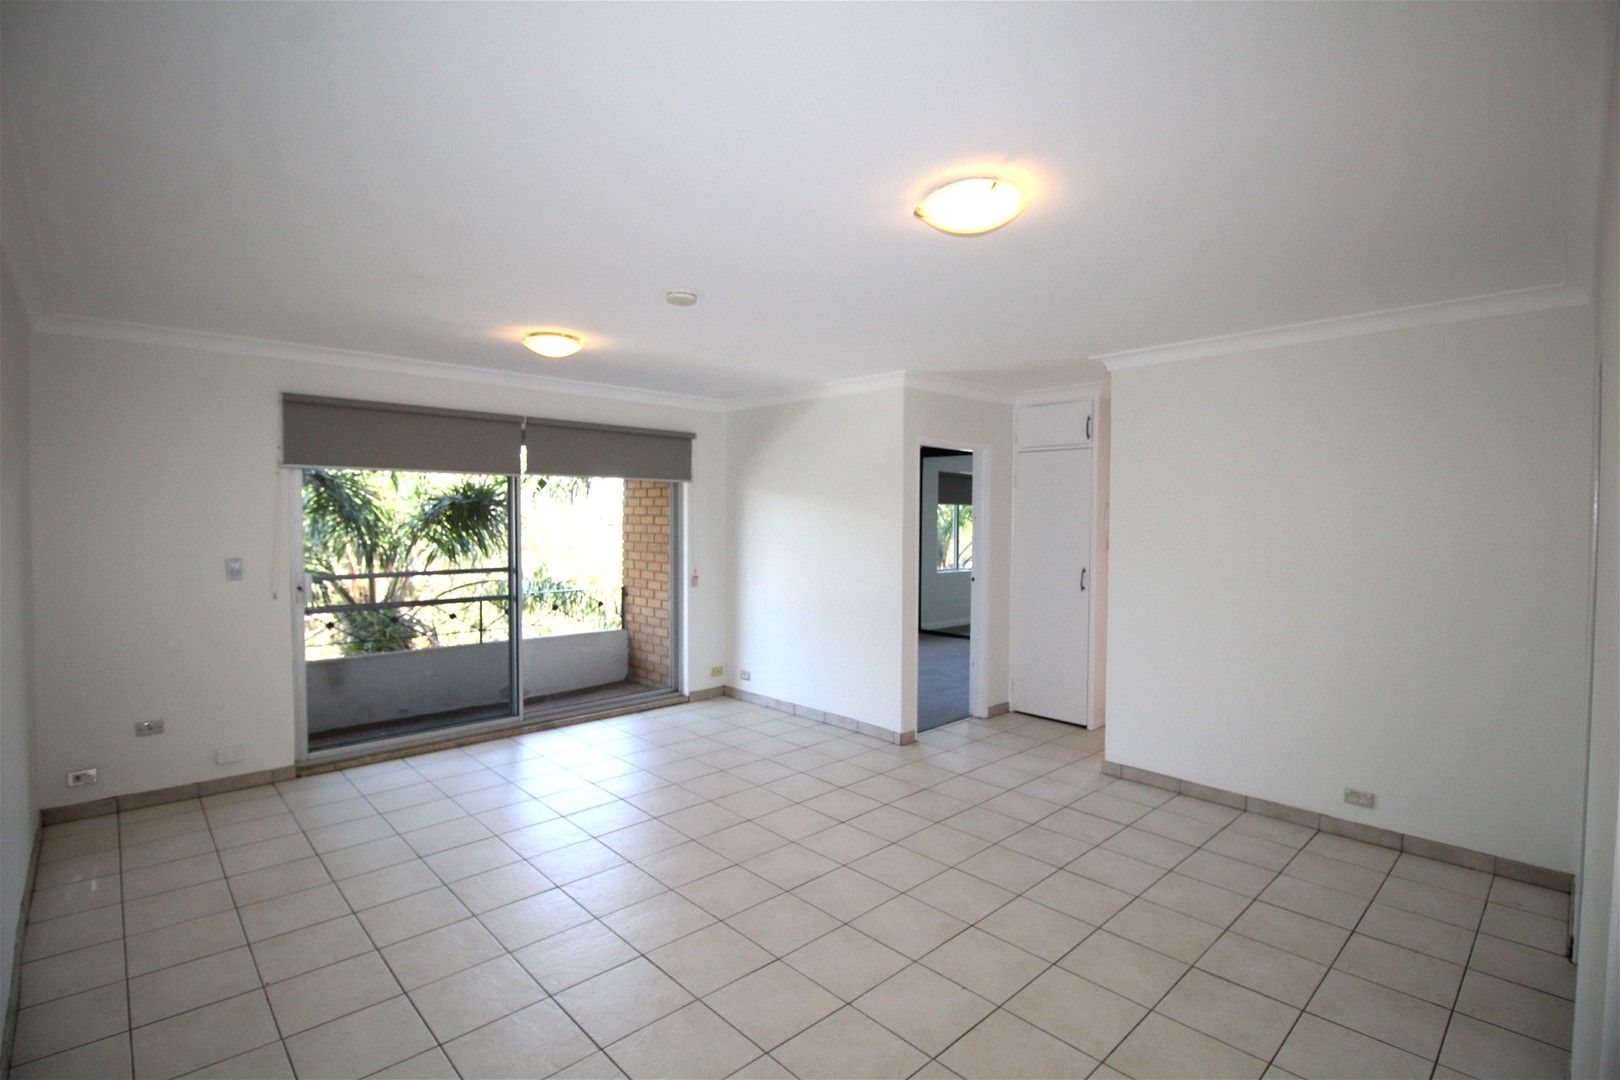 2 bedrooms Apartment / Unit / Flat in 12/3 St Clair Street BELMORE NSW, 2192